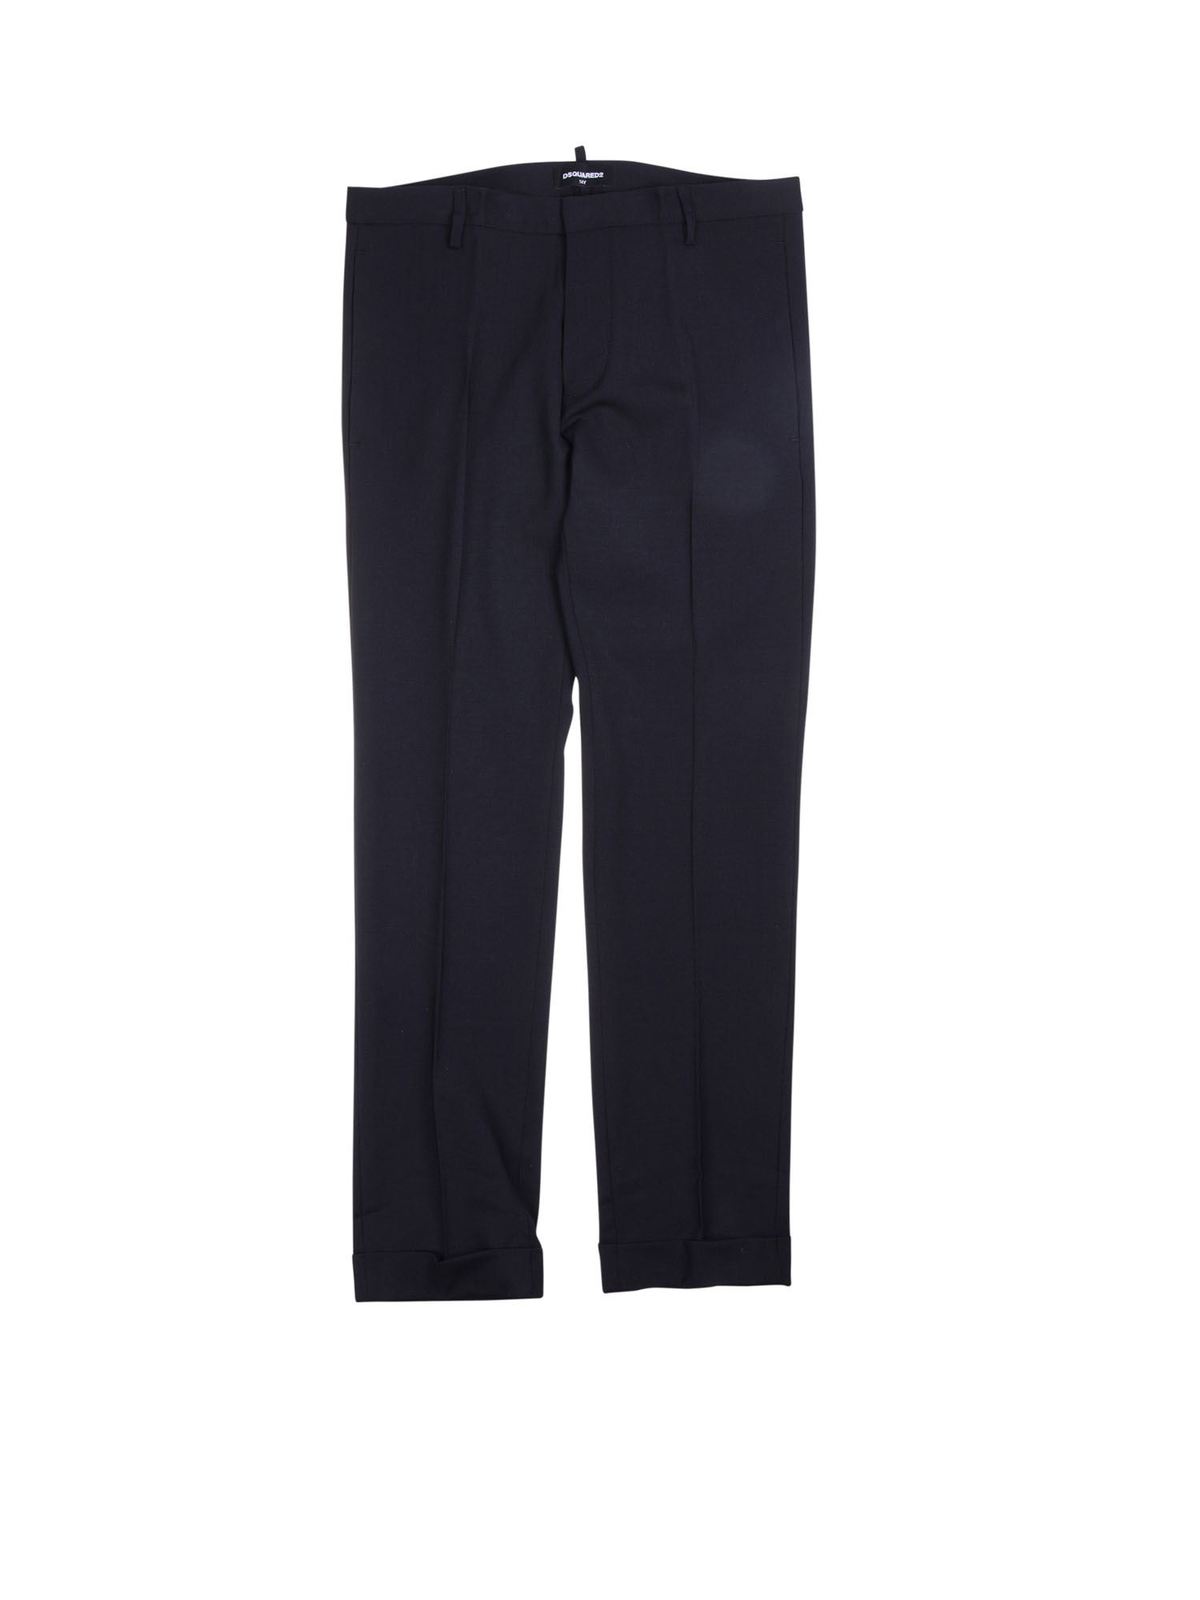 DSQUARED2 CLASSIC PANTS IN BLACK